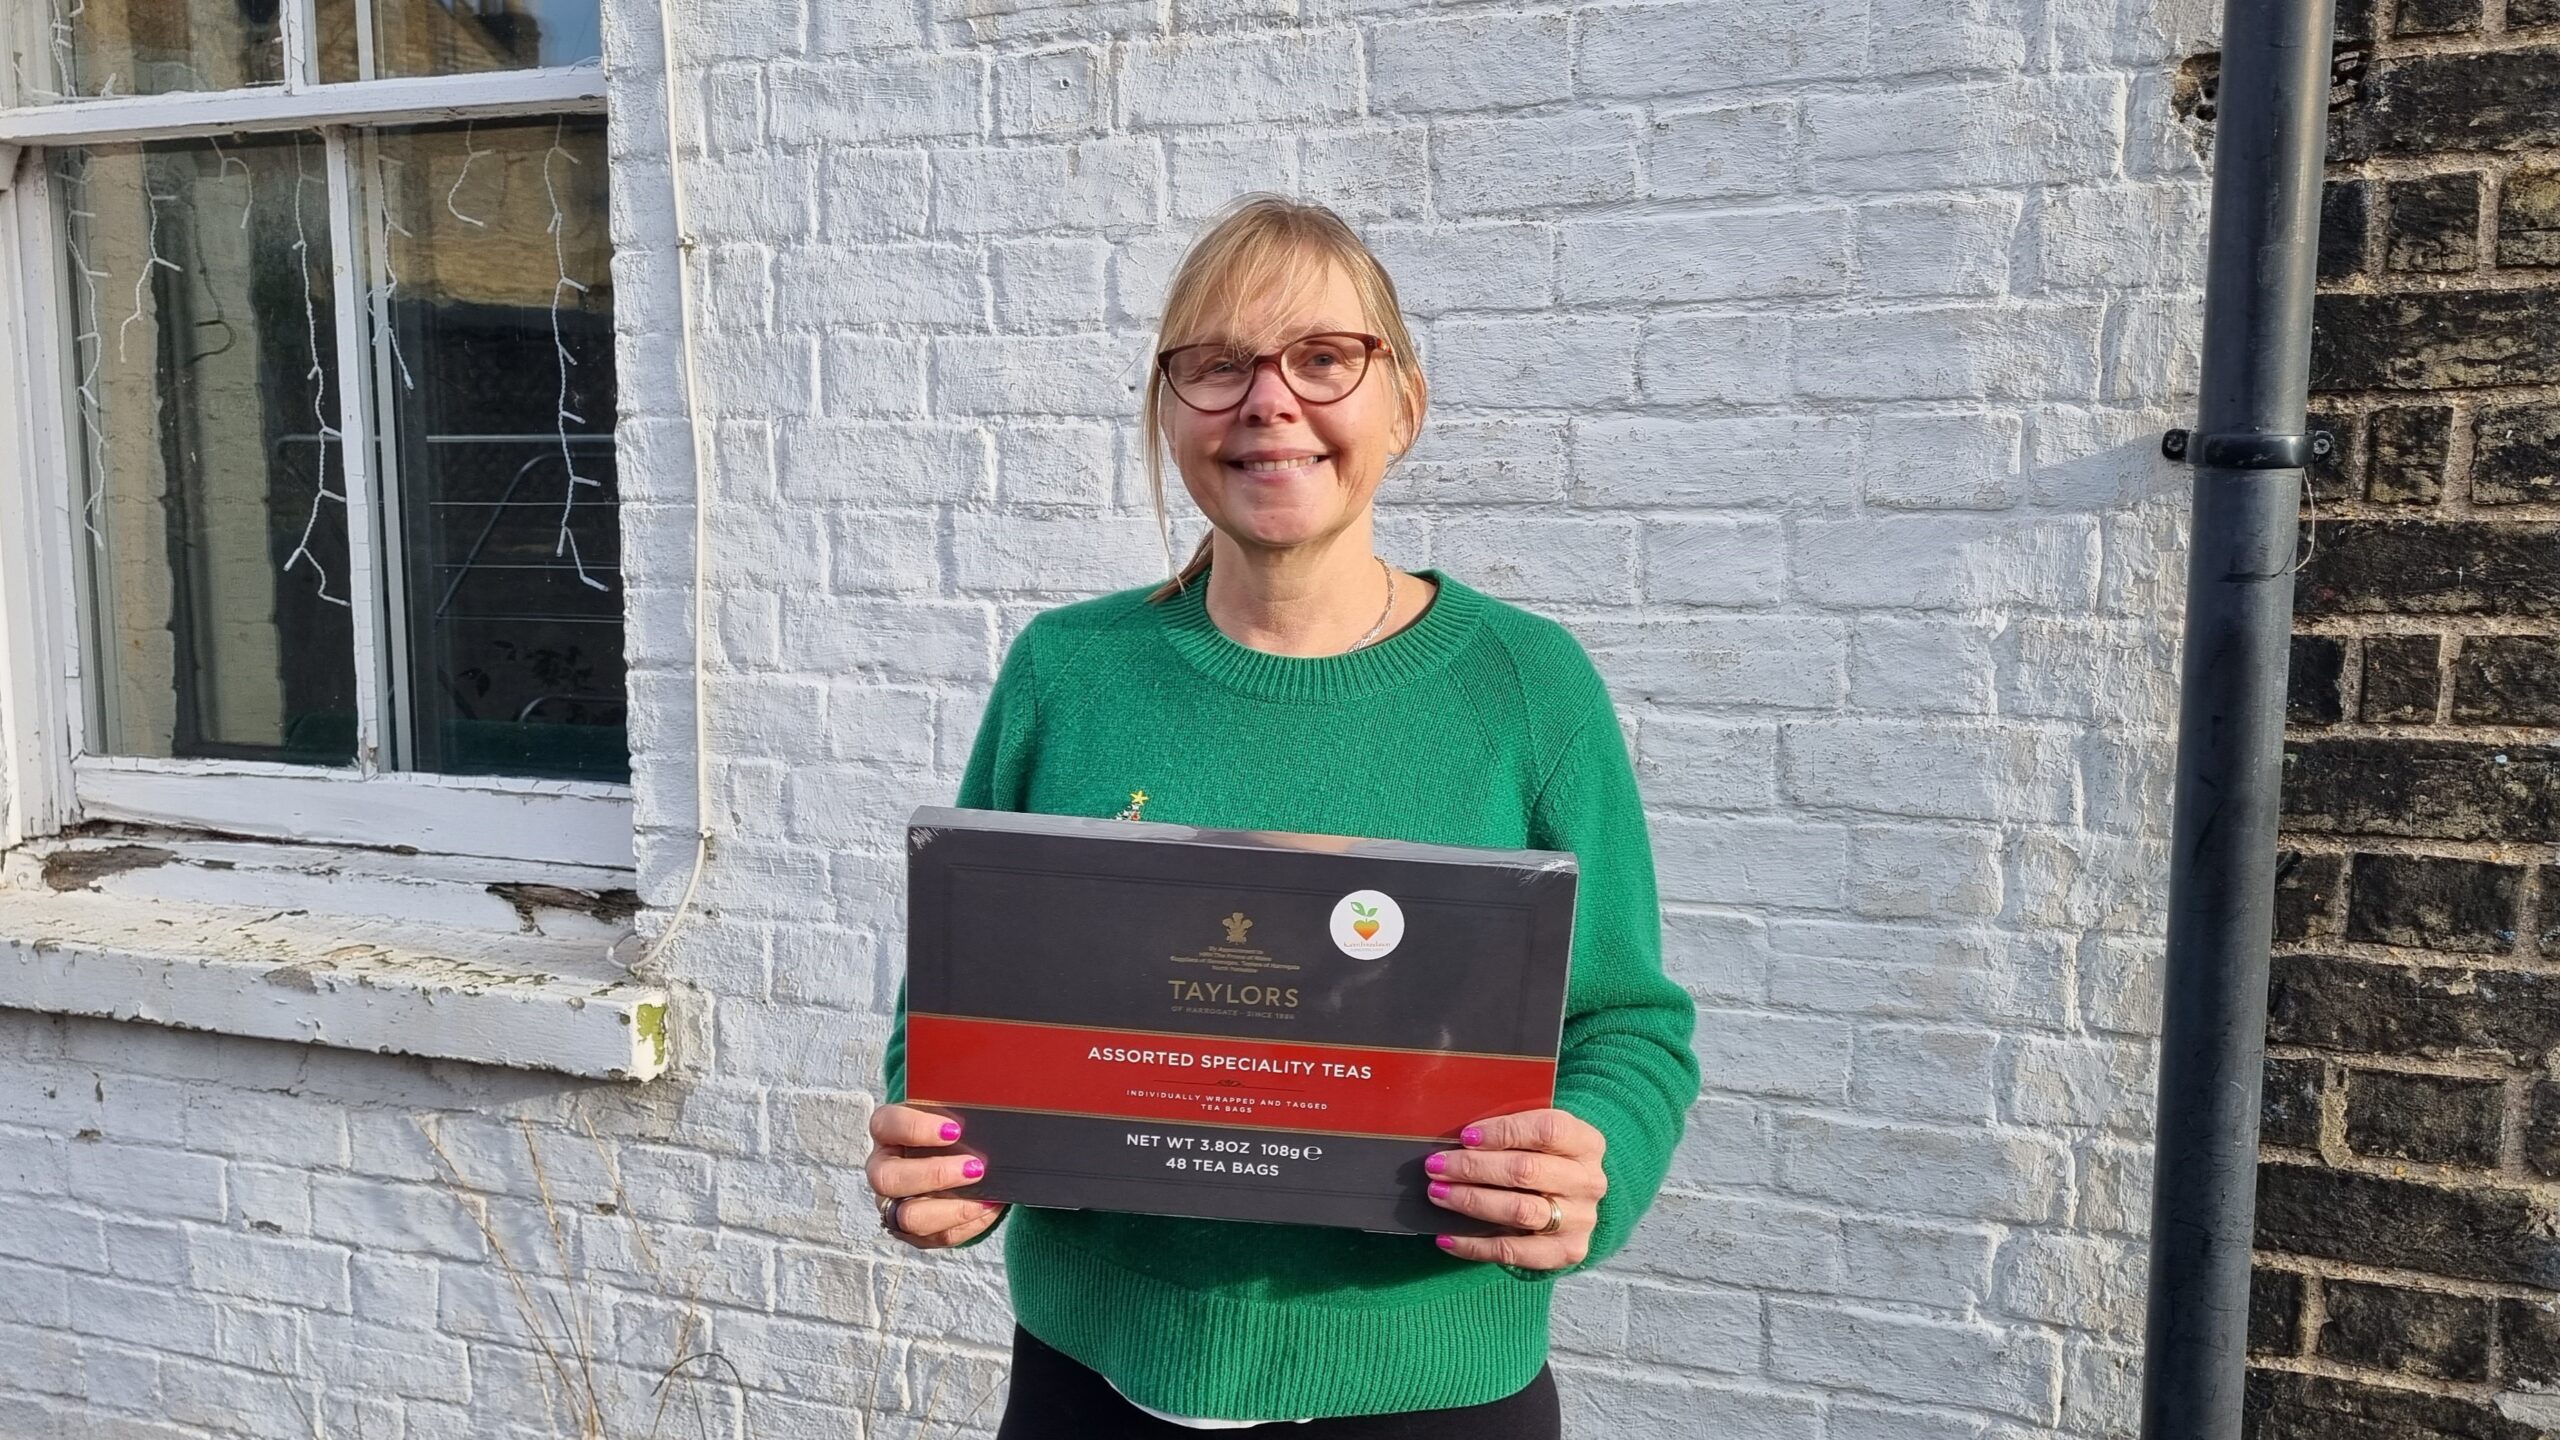 Sophie Evans is the winner of the Karim Foundation's latest Free Prize Draw, which was held at the Mill Road Winter Fair 2023. She is happily holding an assorted speciality tea selection box.